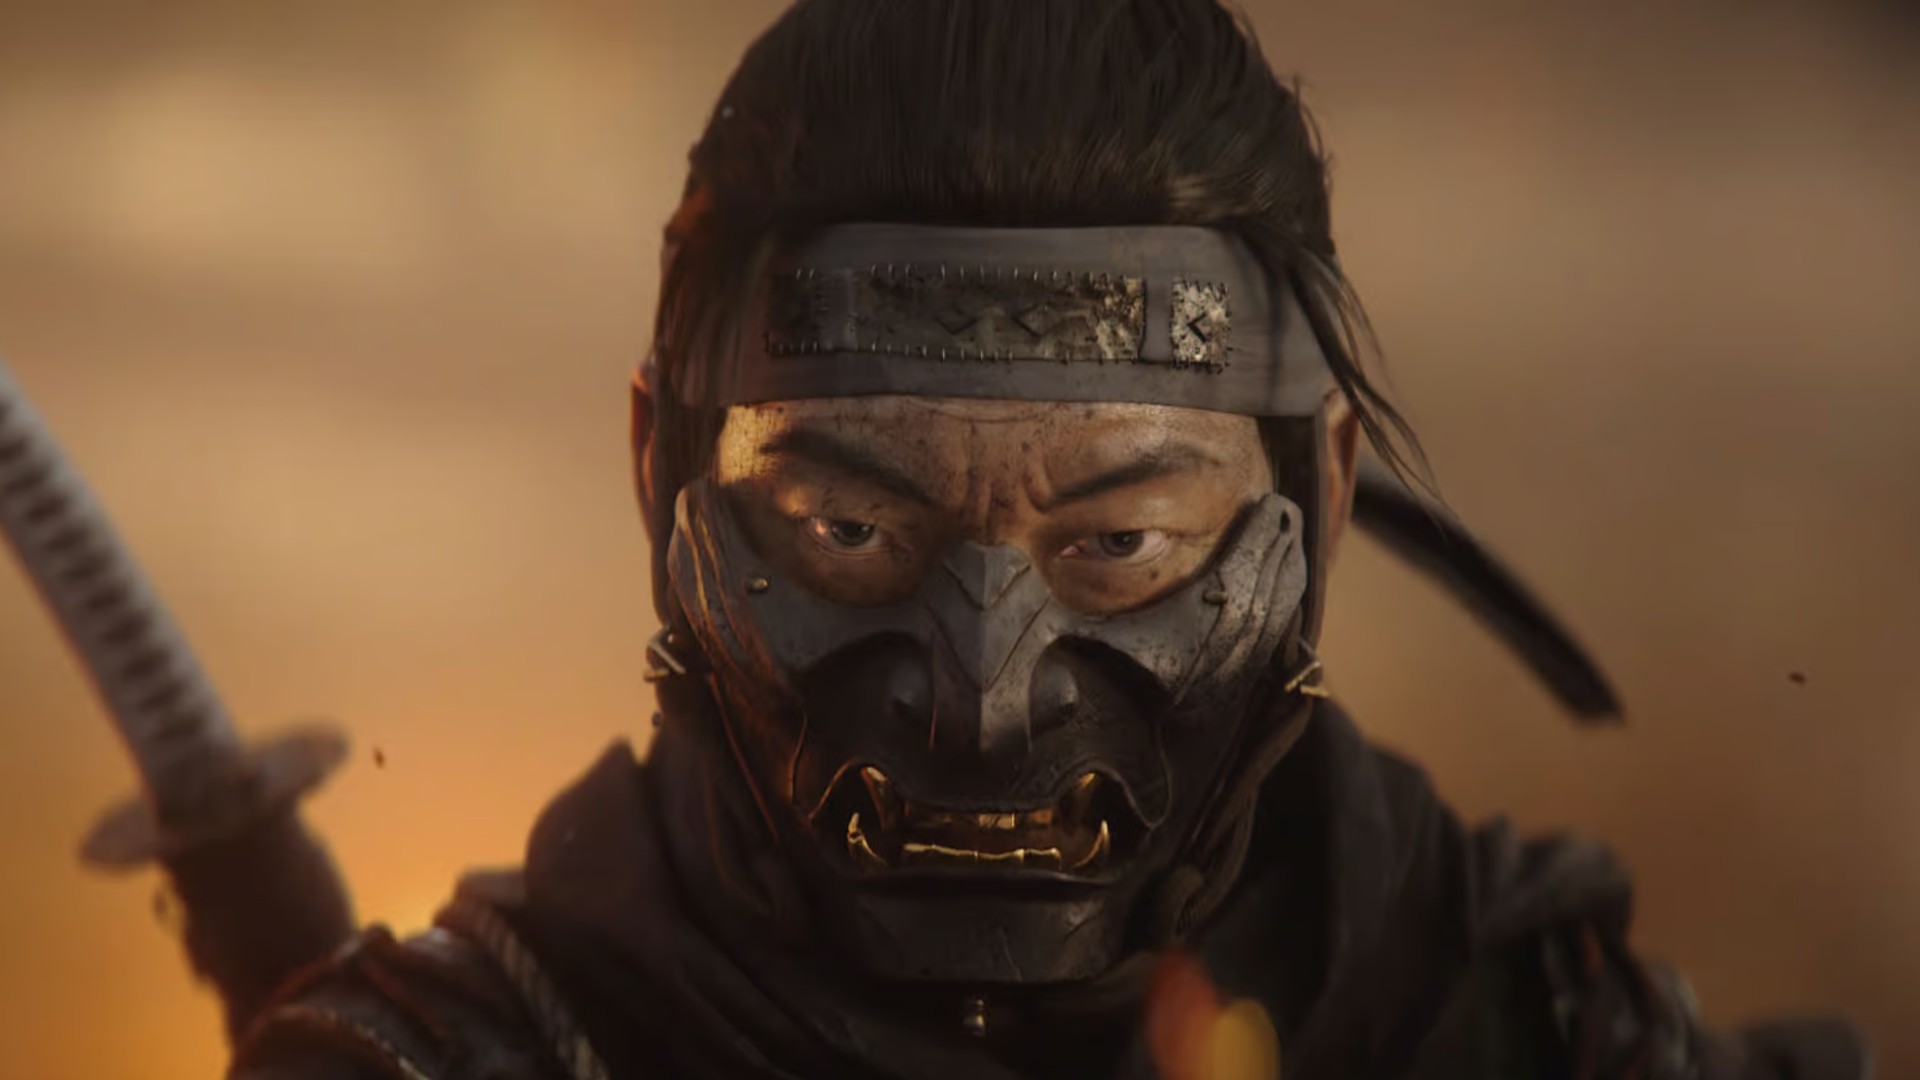 Ghost of Tsushima system requirements